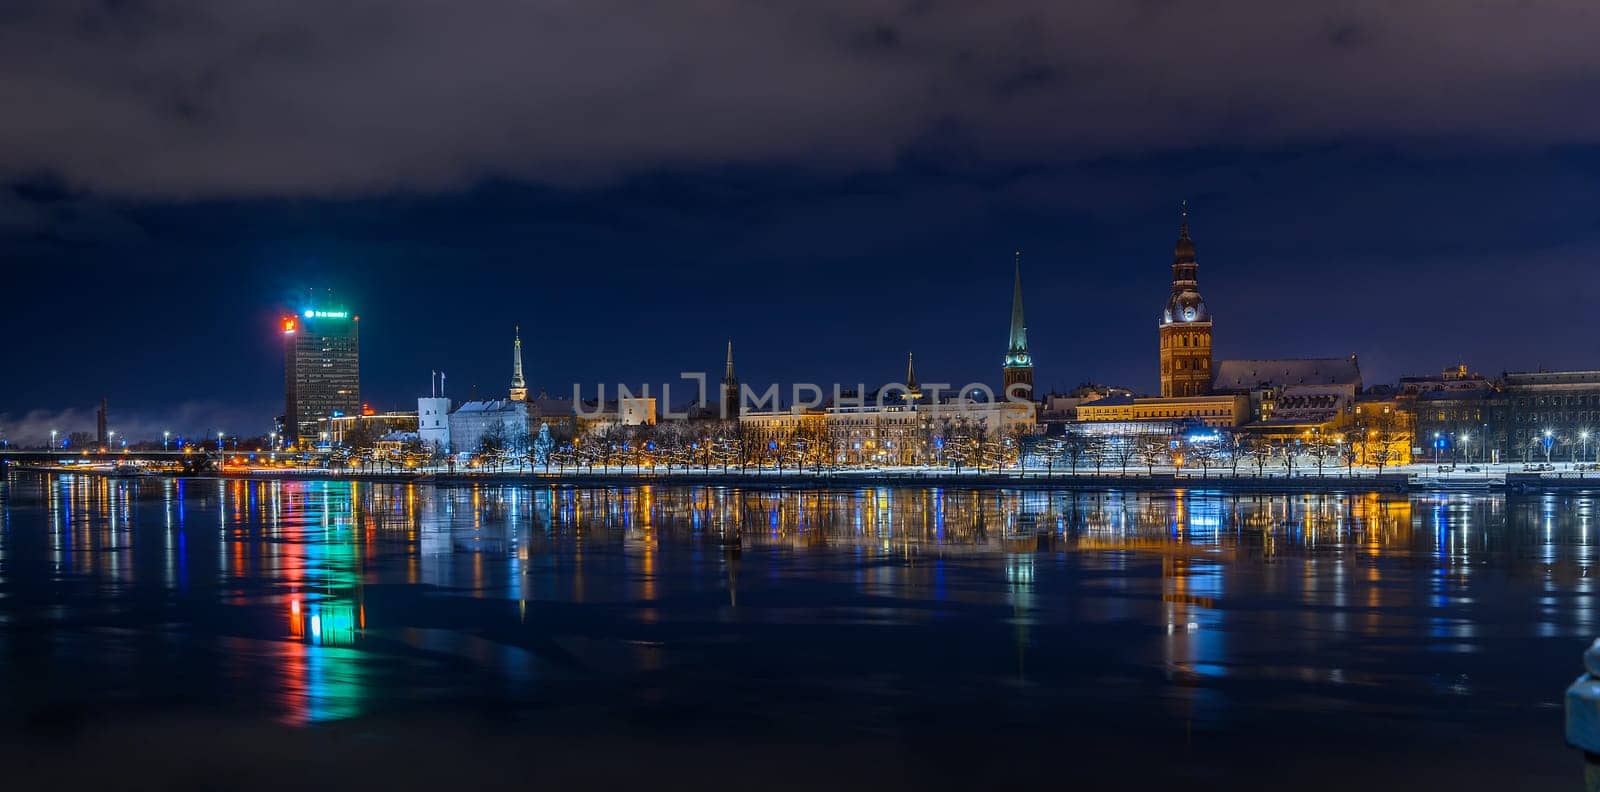 panorama of Old Riga evening view and illumination across the river 1 by Mixa74